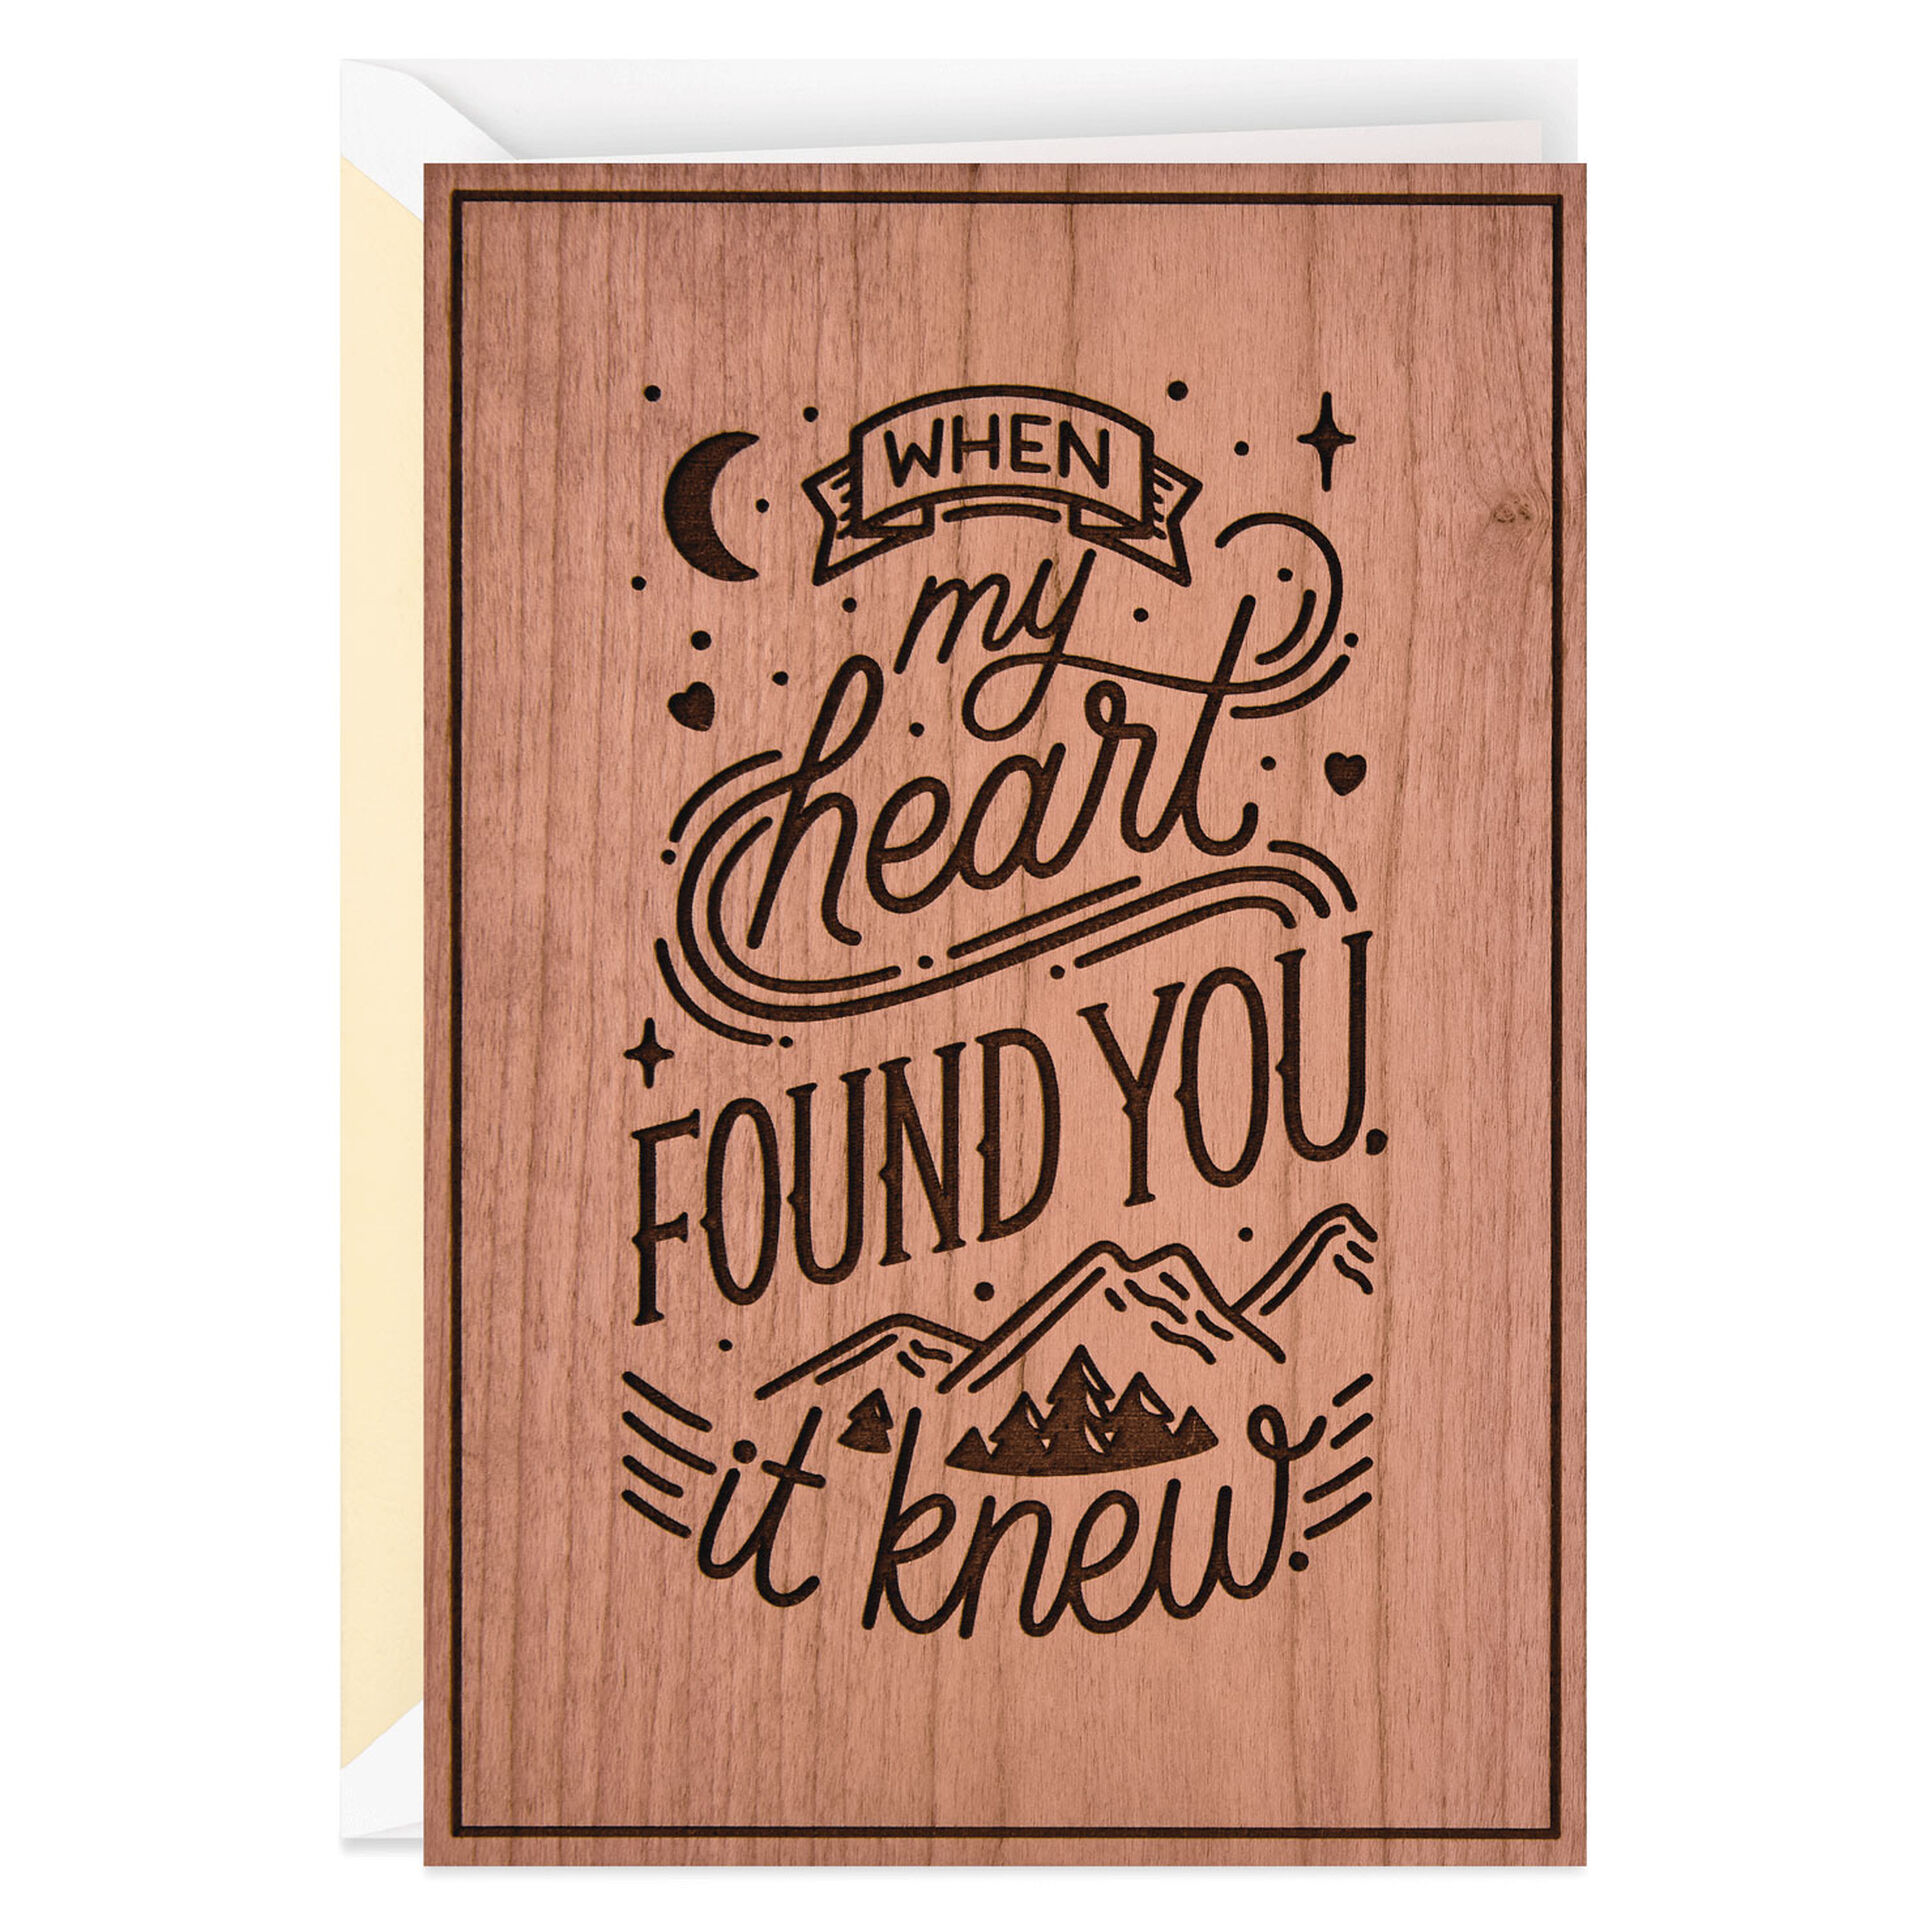 My-Heart-Found-You-Anniversary-Card-for-Husband-or-Wife_899LAD9586_01